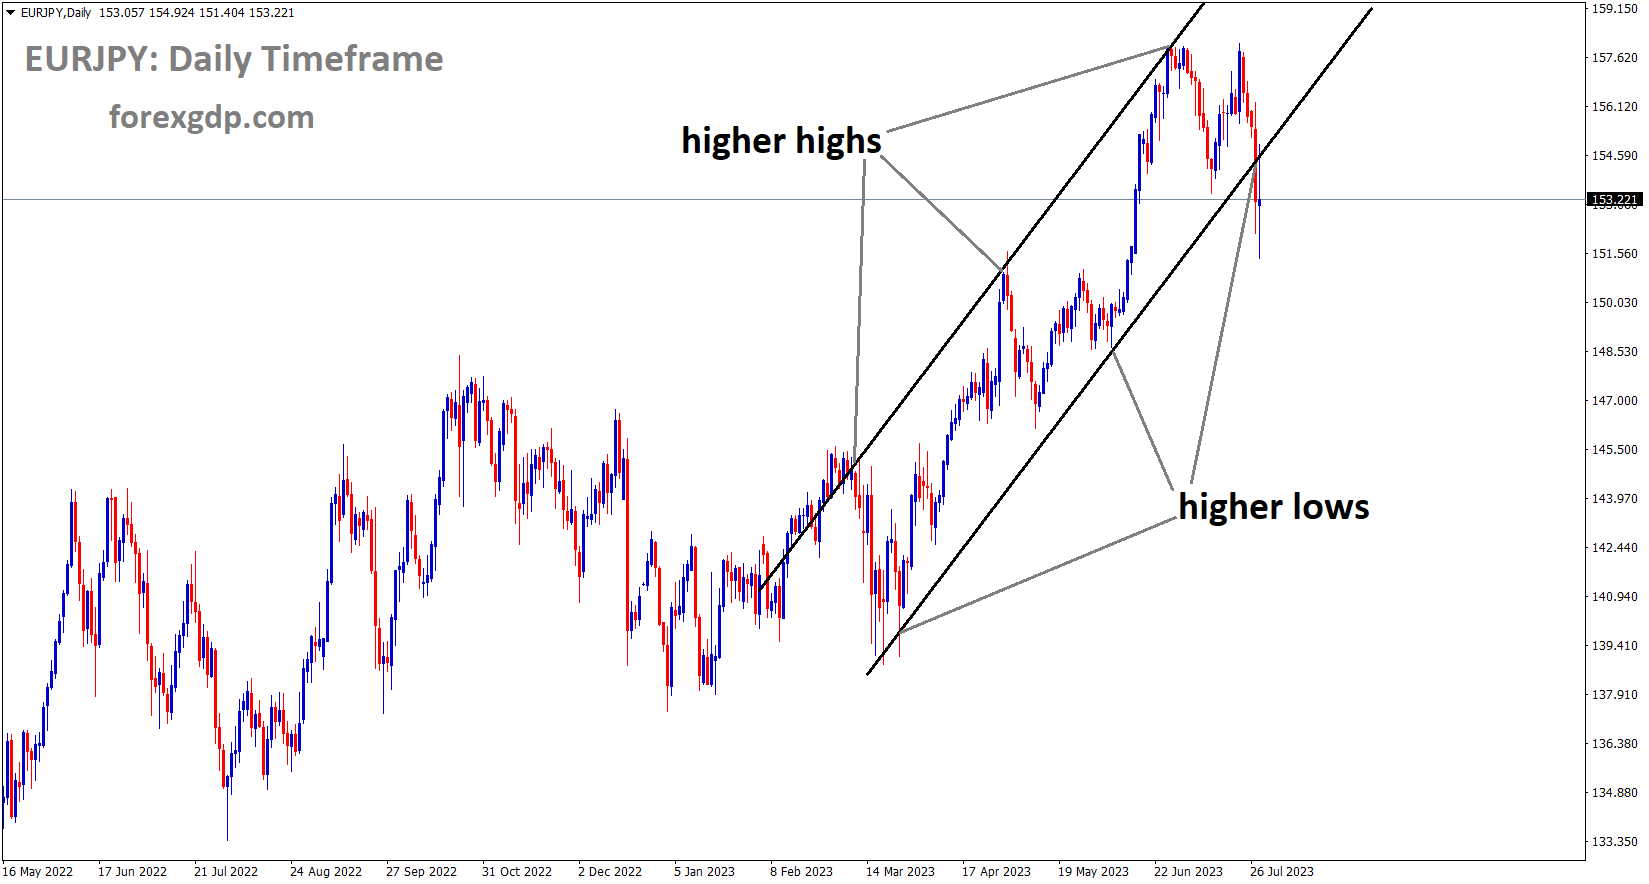 EURJPY is moving in an Ascending channel and the market has reached the higher low area of the channel 3